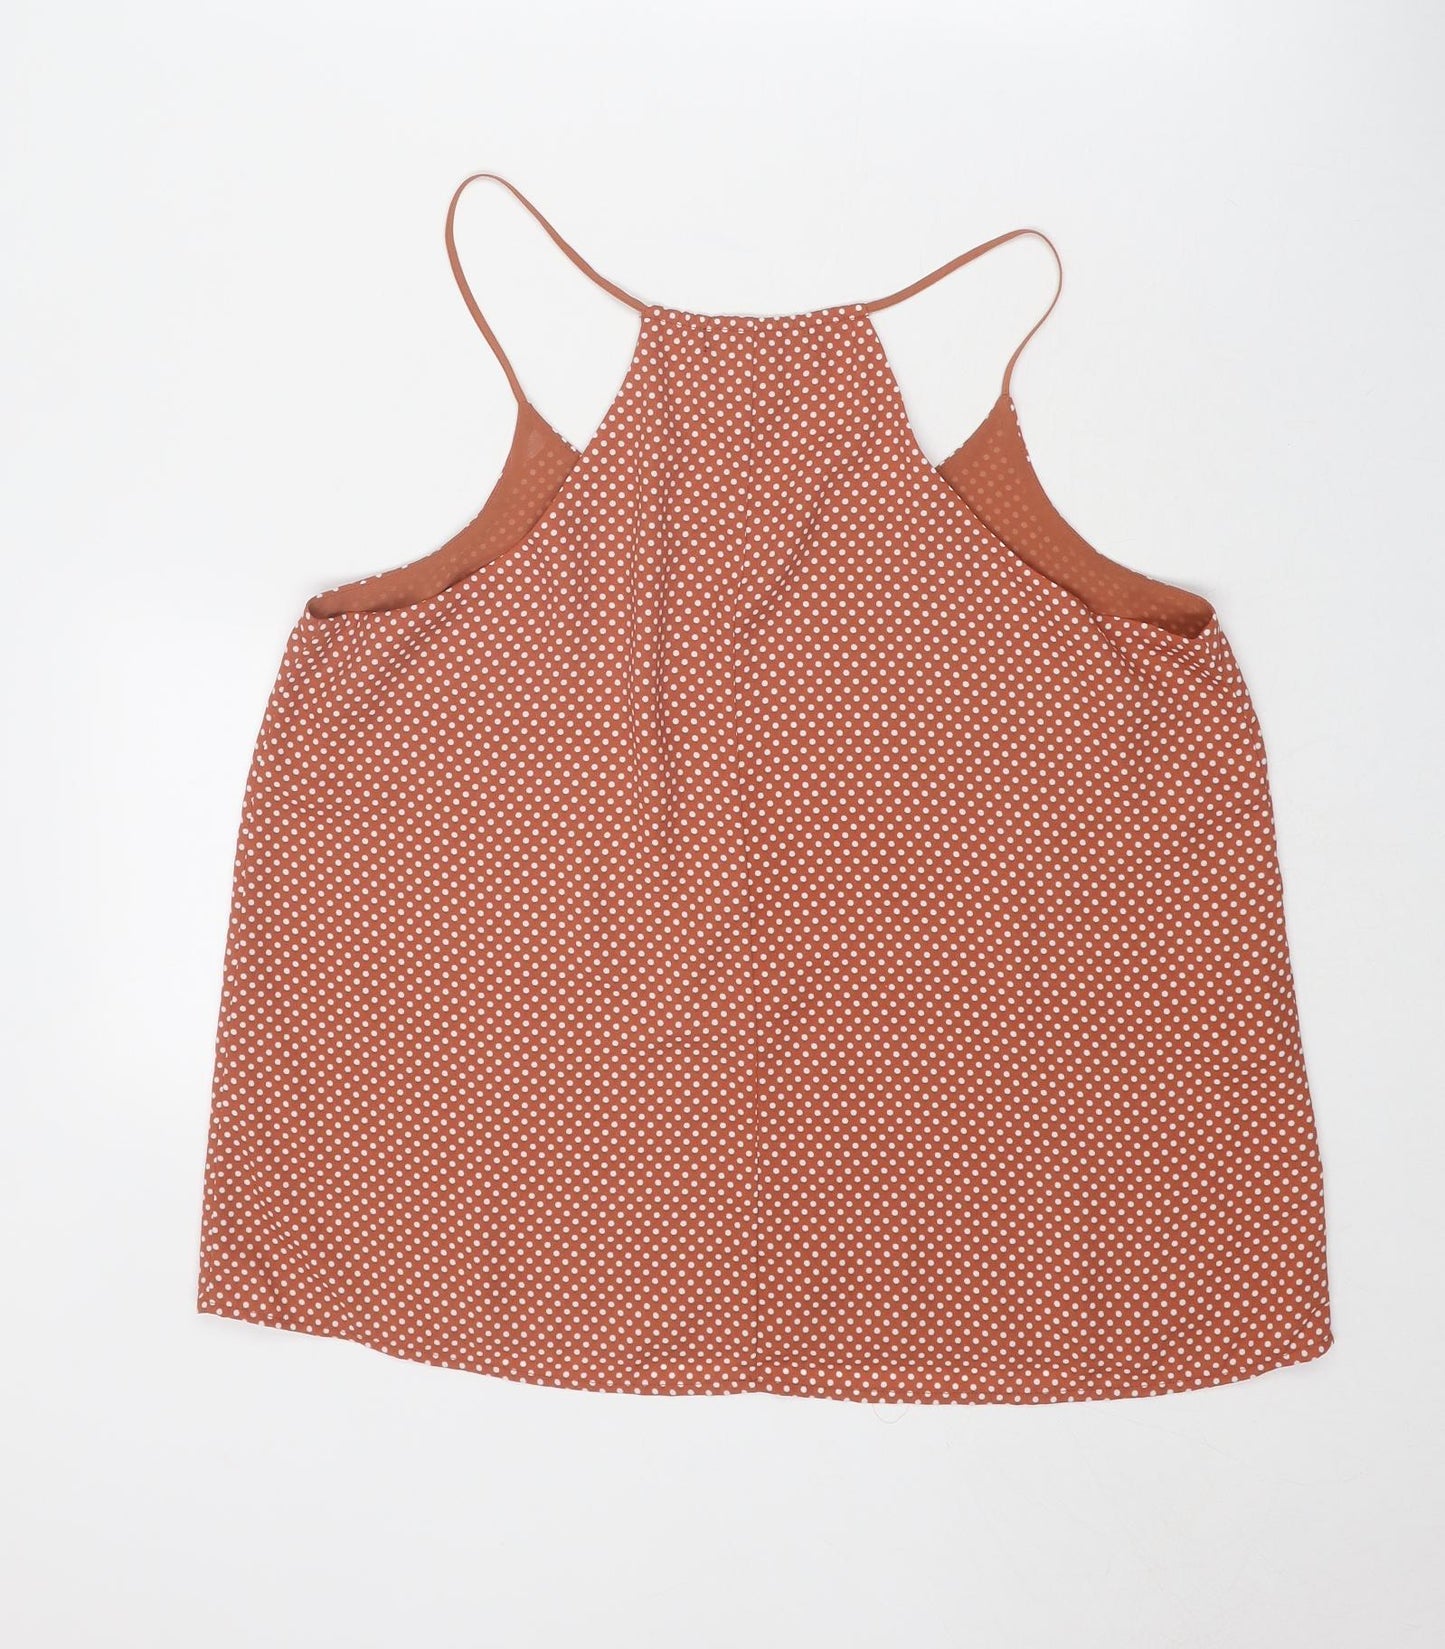 FOREVER 21 Womens Brown Polka Dot Polyester Camisole Tank Size M Round Neck